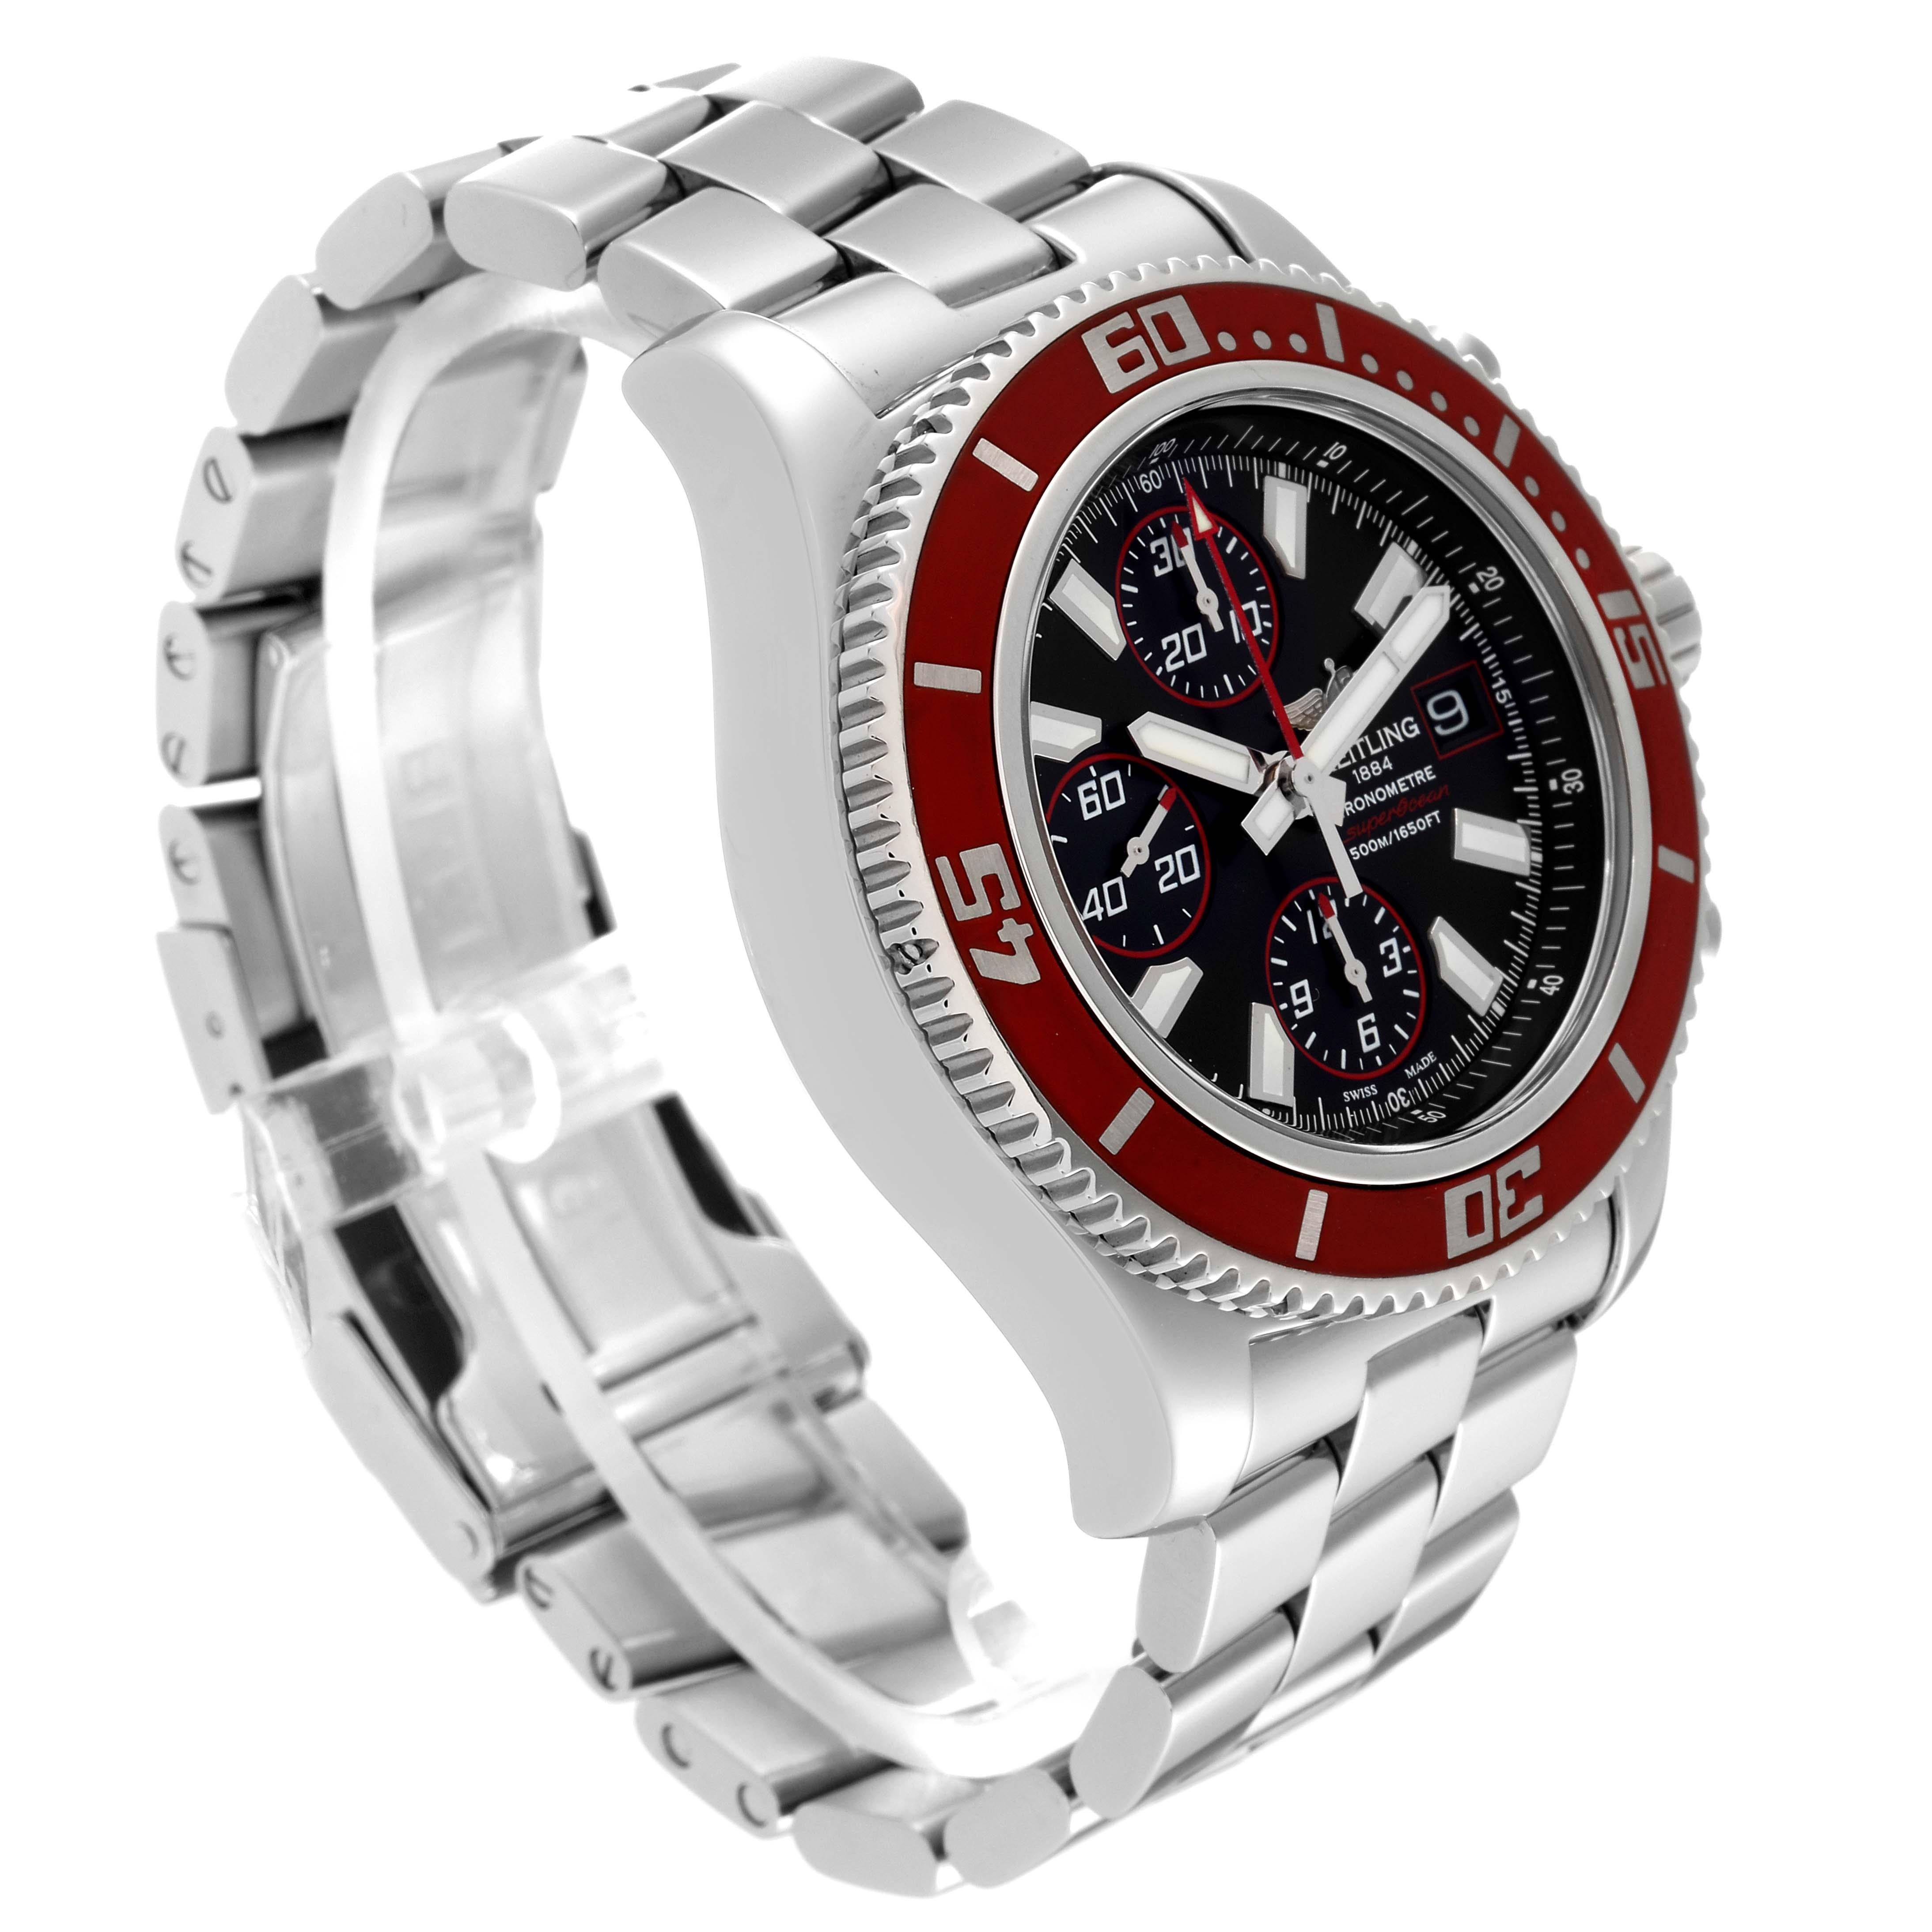 Breitling Aeromarine SuperOcean II Red Bezel Limited Edition Mens Watch A13341. Automatic self-winding chronograph movement. Stainless steel case 44.0 mm in diameter. Unidirectional rotating bezel with red ion-plated top ring. Scratch resistant